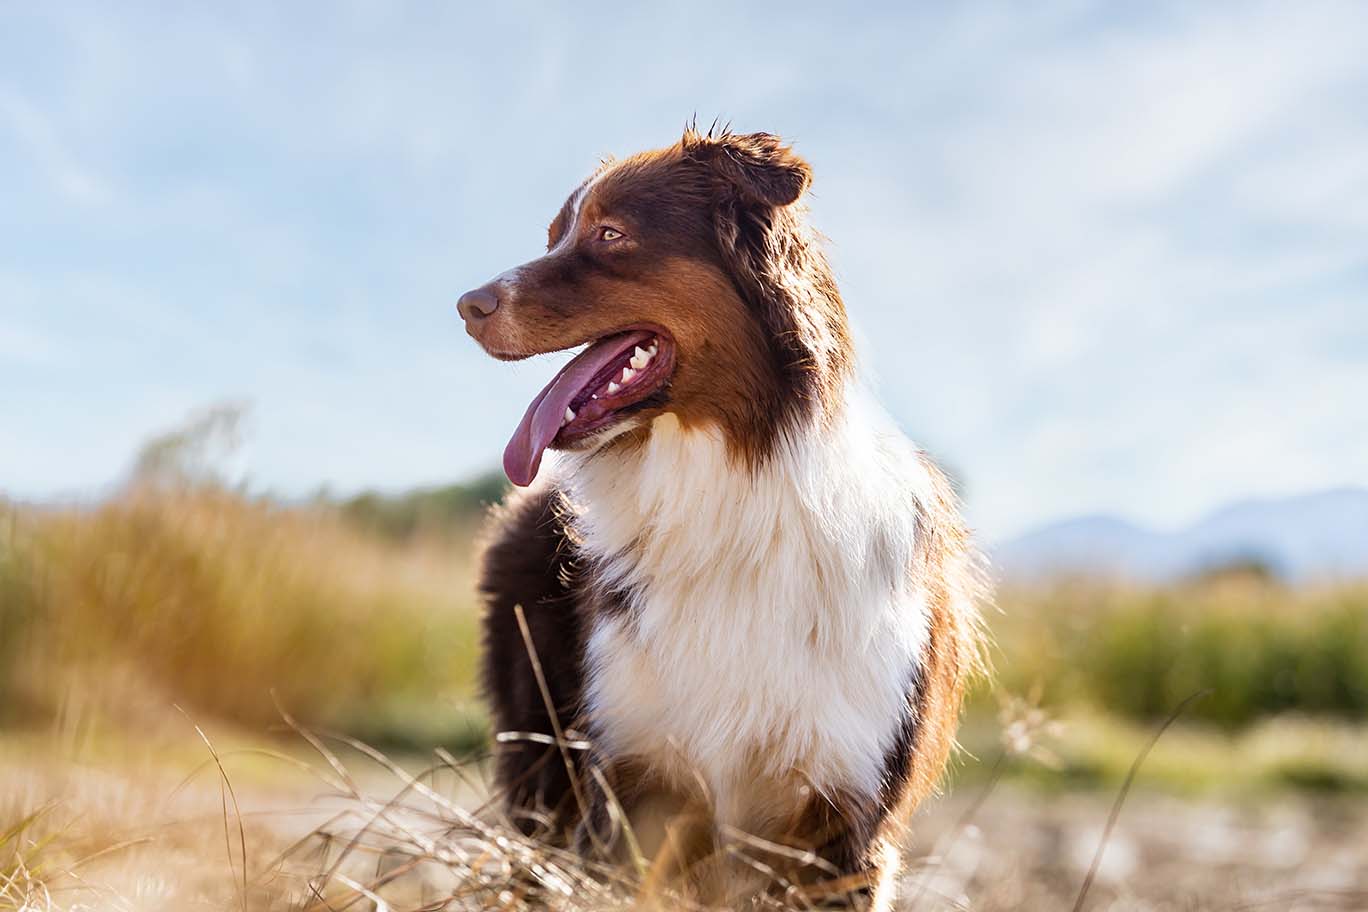 A brown and white dog with a fluffy coat panting in a sunny, grassy field.